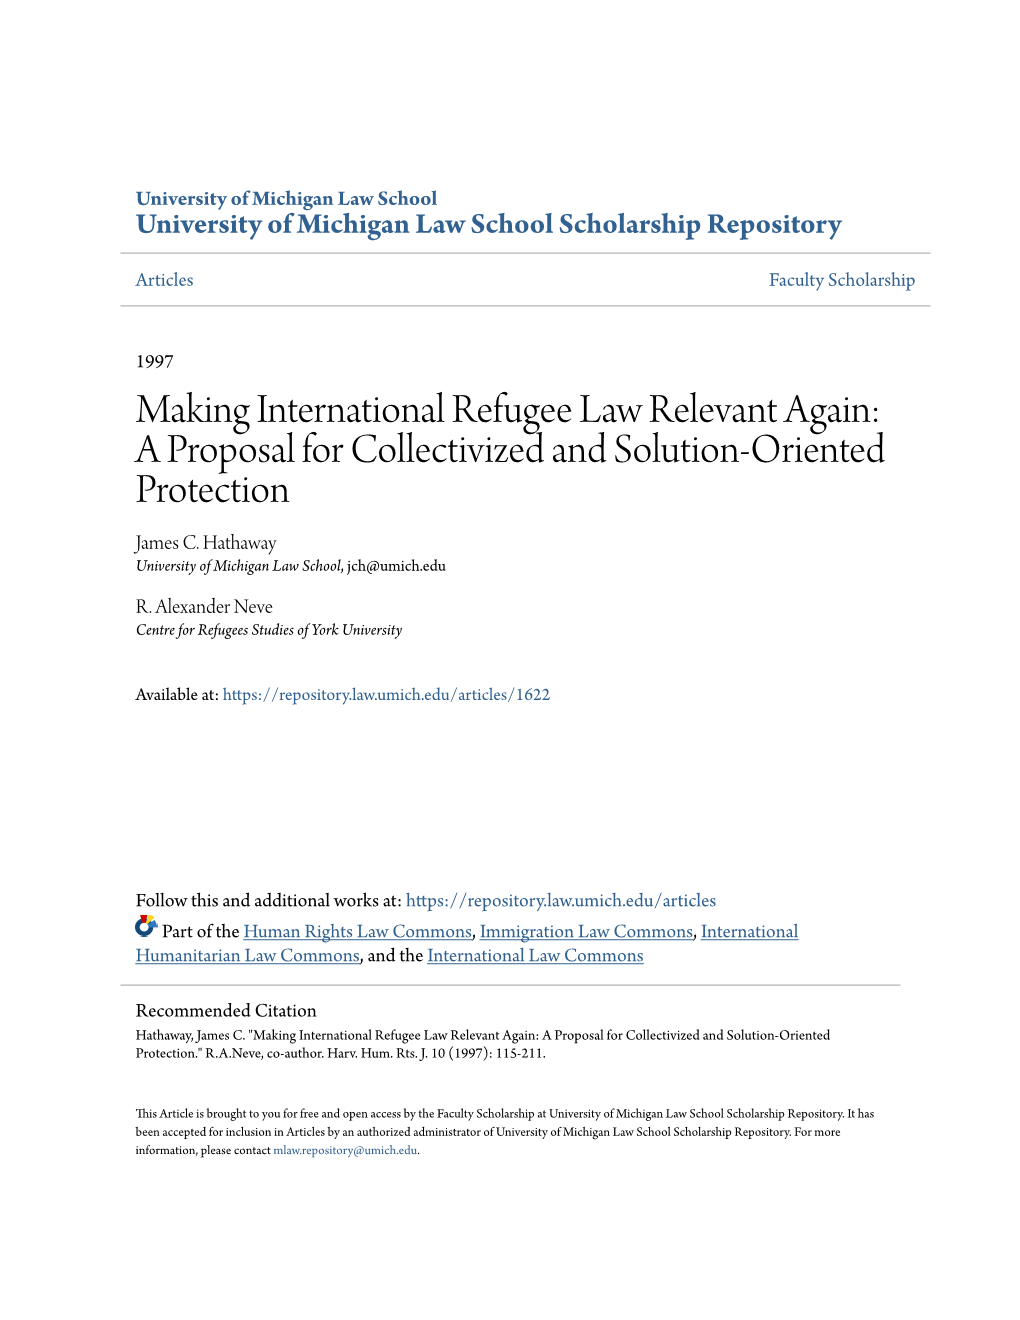 Making International Refugee Law Relevant Again: a Proposal for Collectivized and Solution-Oriented Protection James C